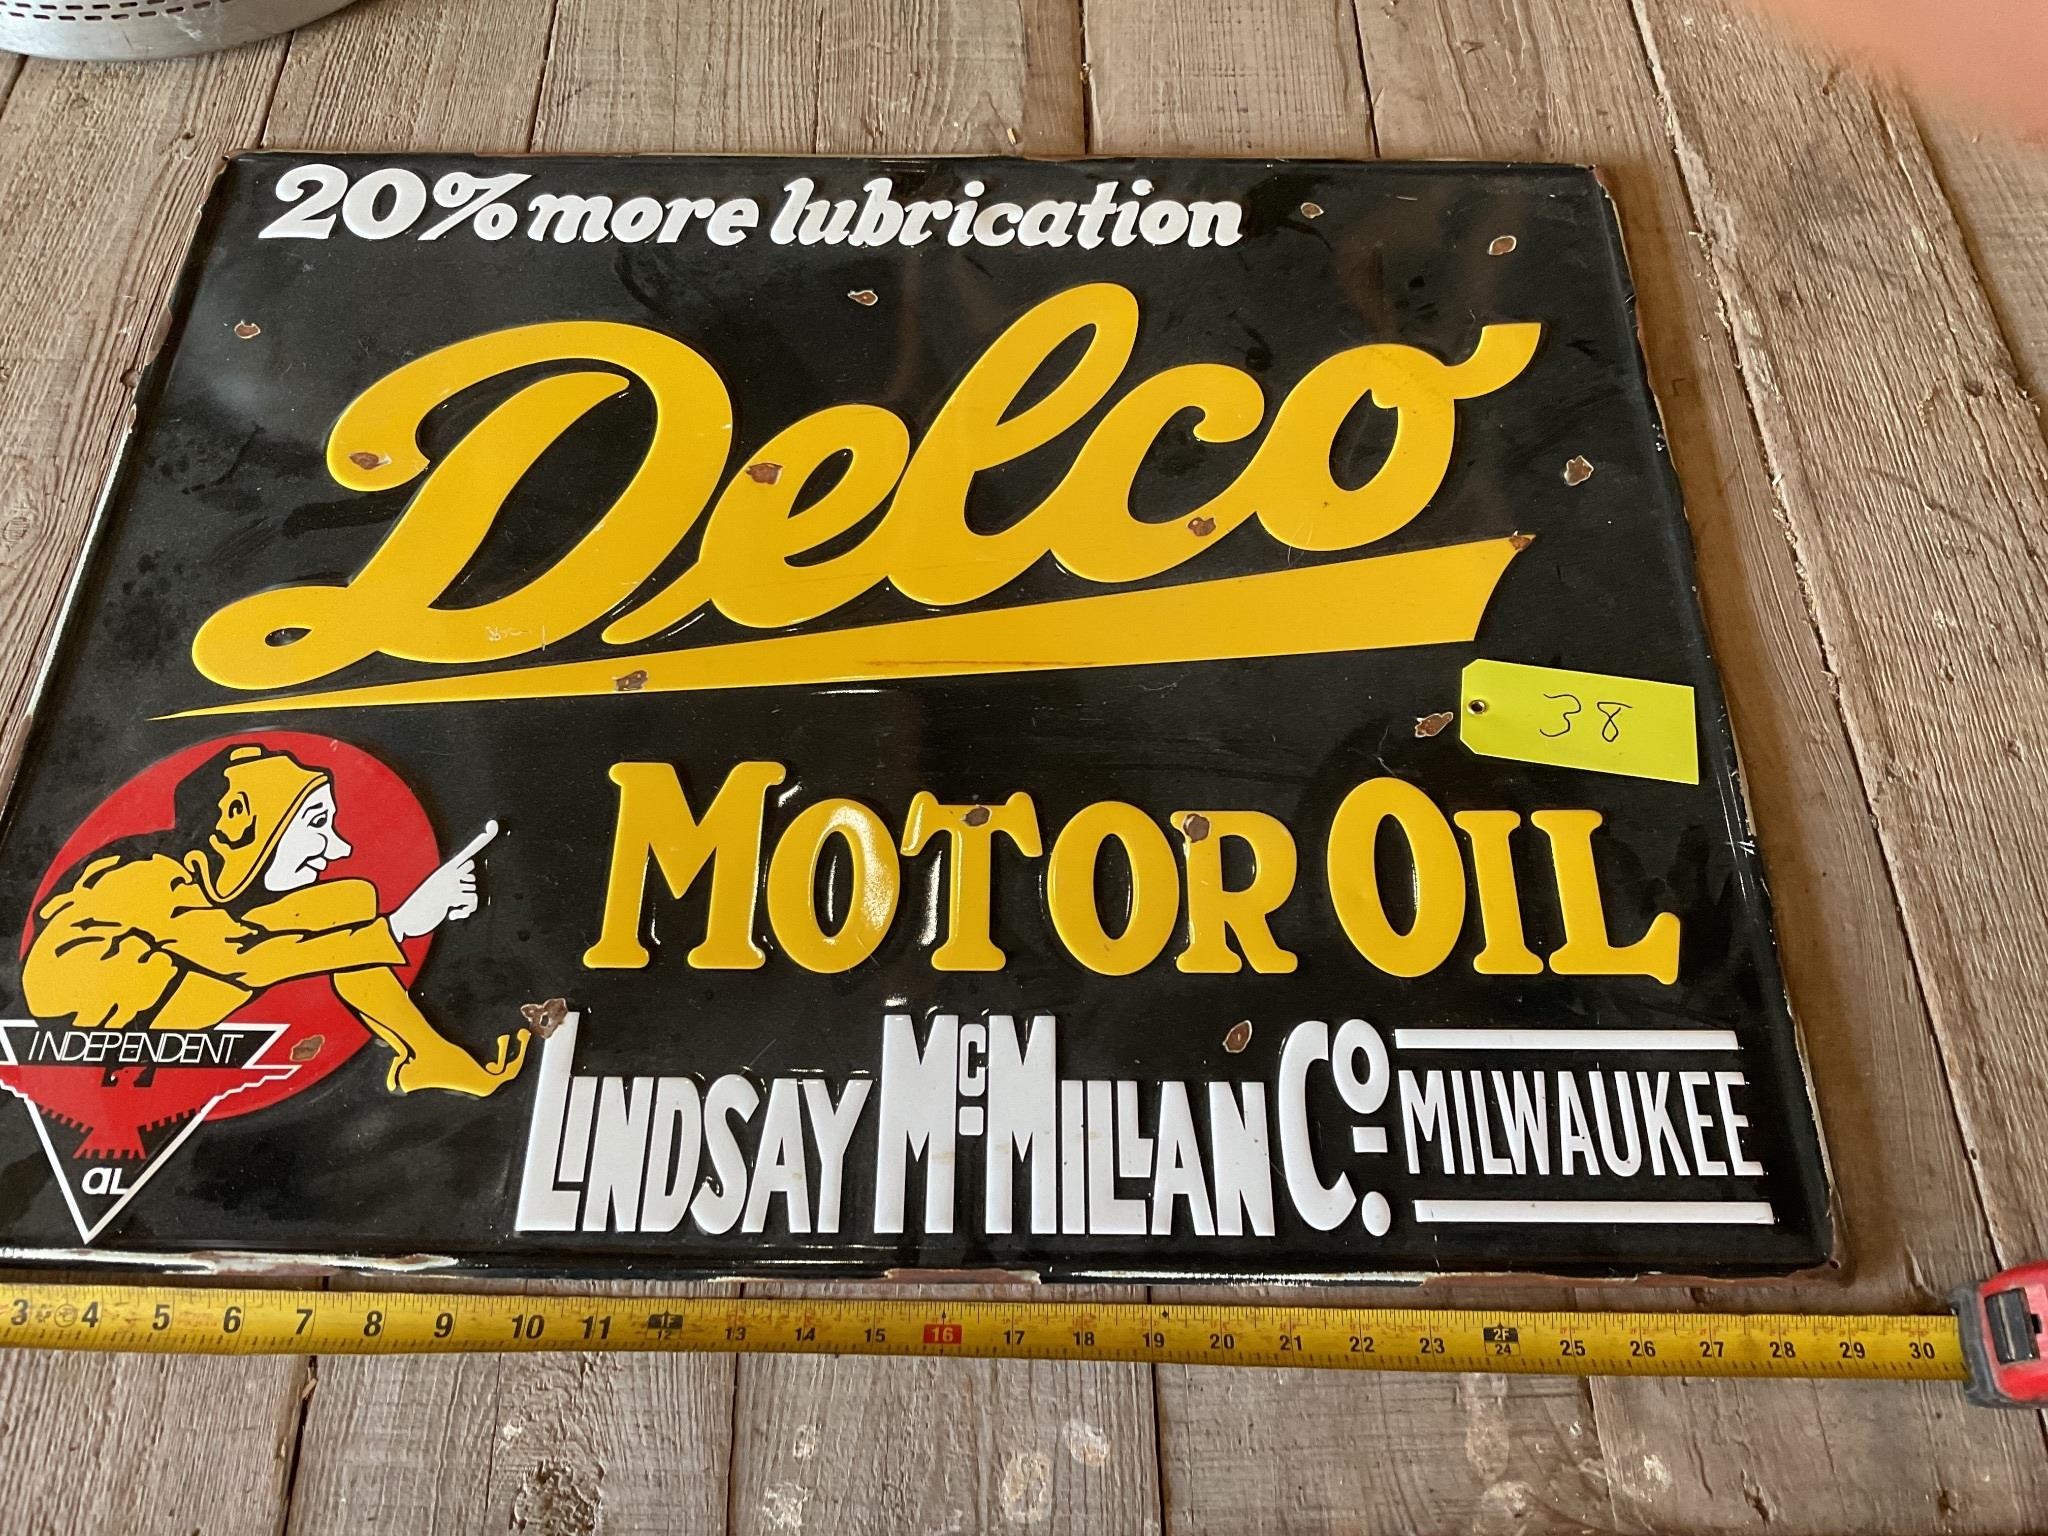 Large Delco motor oil metal sign